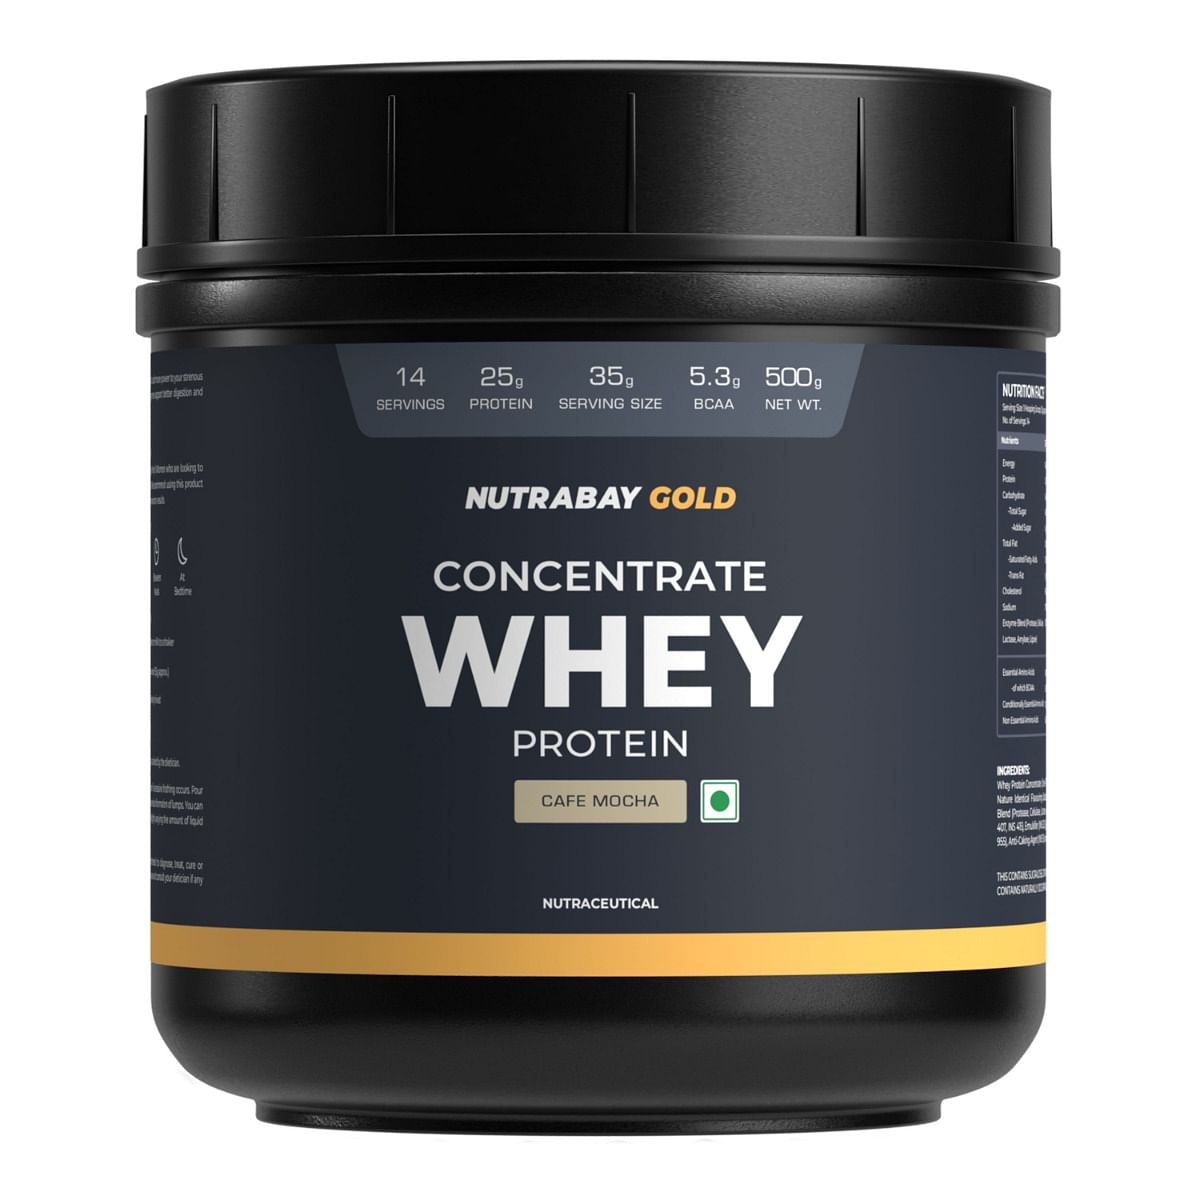 NUTRABAY Gold 100 Whey Protein 500g, 15 Servings: 25g Protein, 5.3g BCAA, 3.9g Glutamic Acid. Muscle Growth & Recovery Supplement for Men & Women.